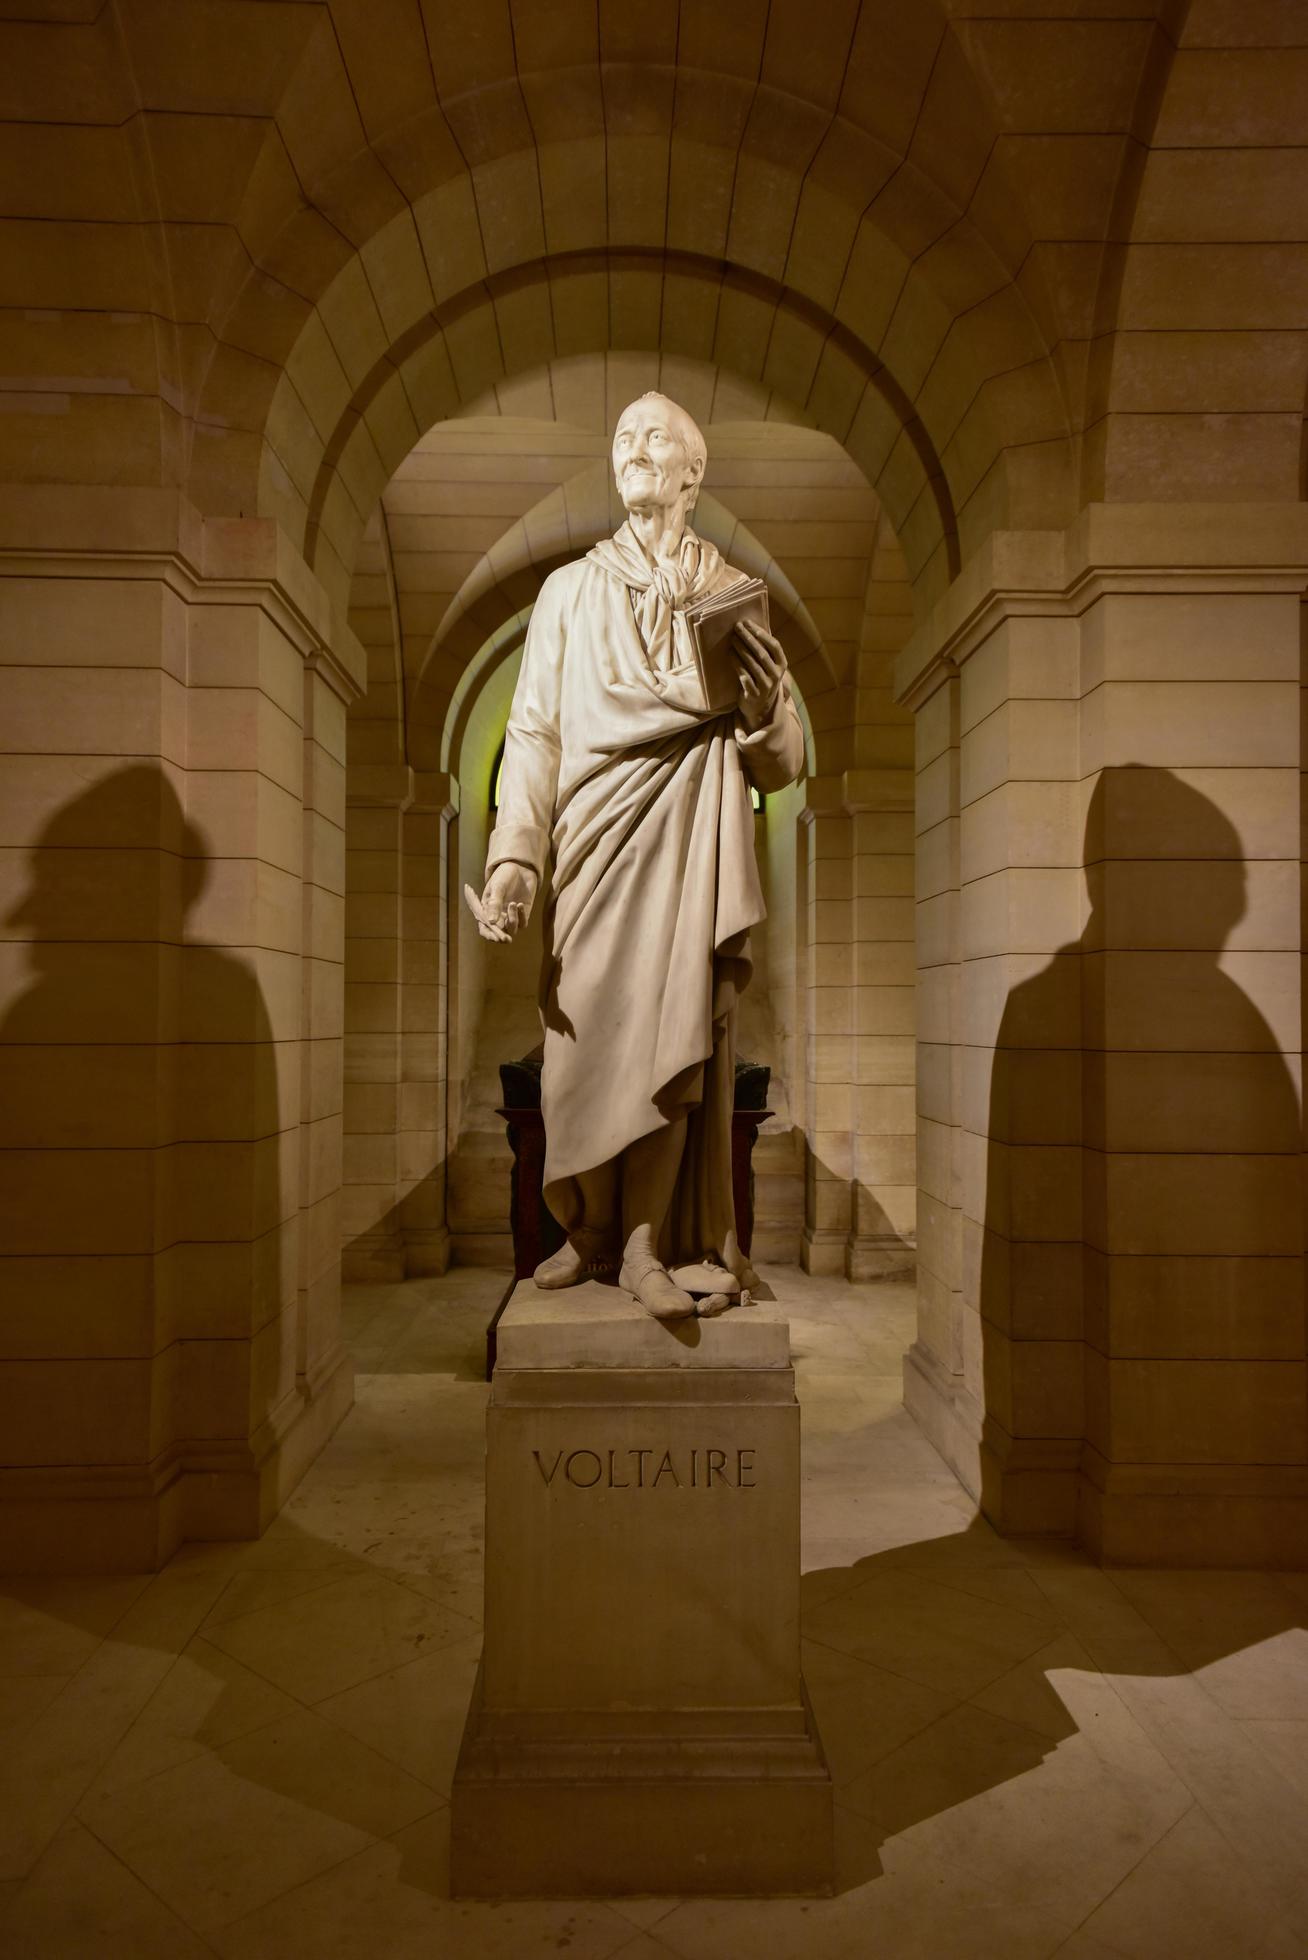 paris-france-may-17-2017-voltaire-tomb-inside-the-crypts-of-french-mausoleum-for.jpg